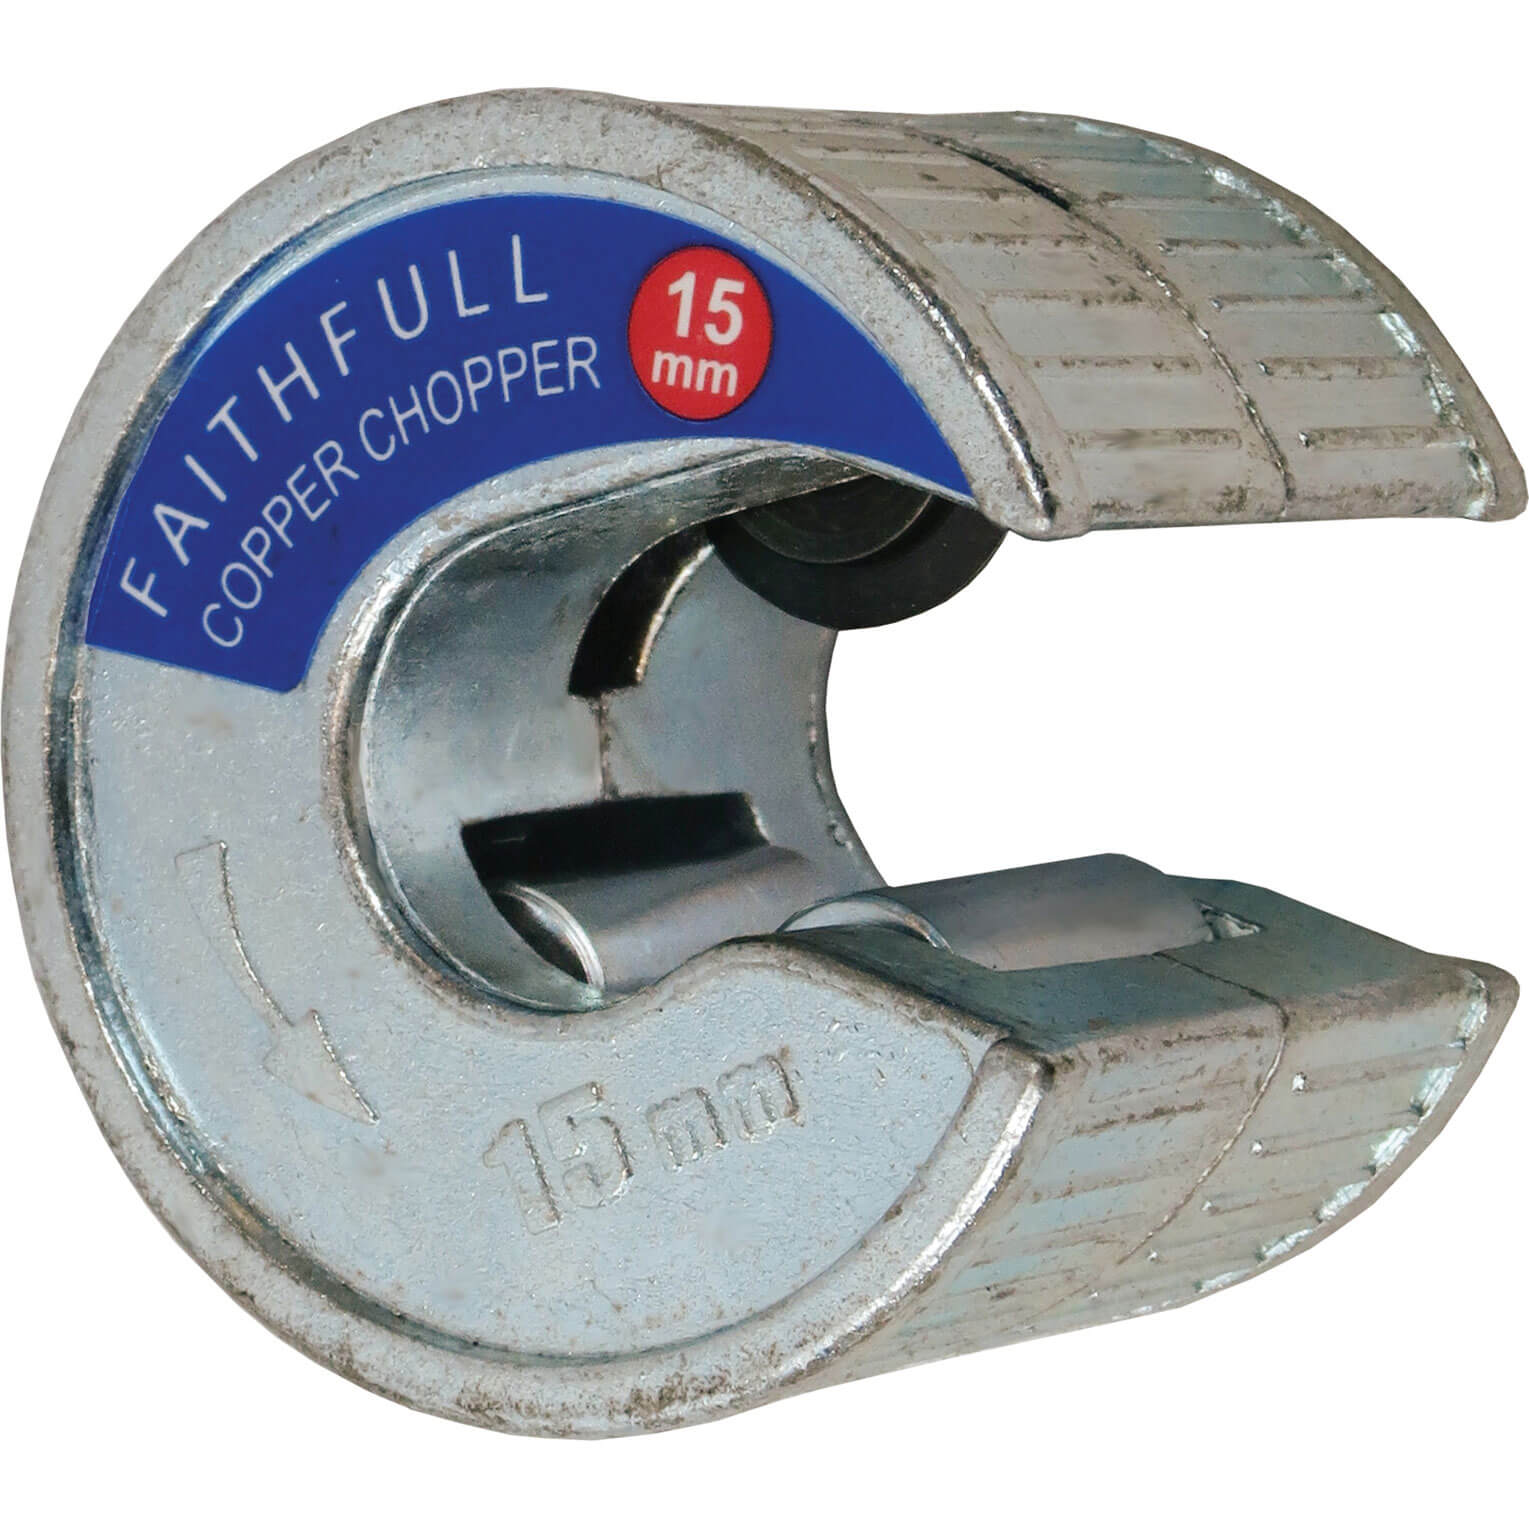 Image of Faithfull Copper Pipe Cutter 15mm